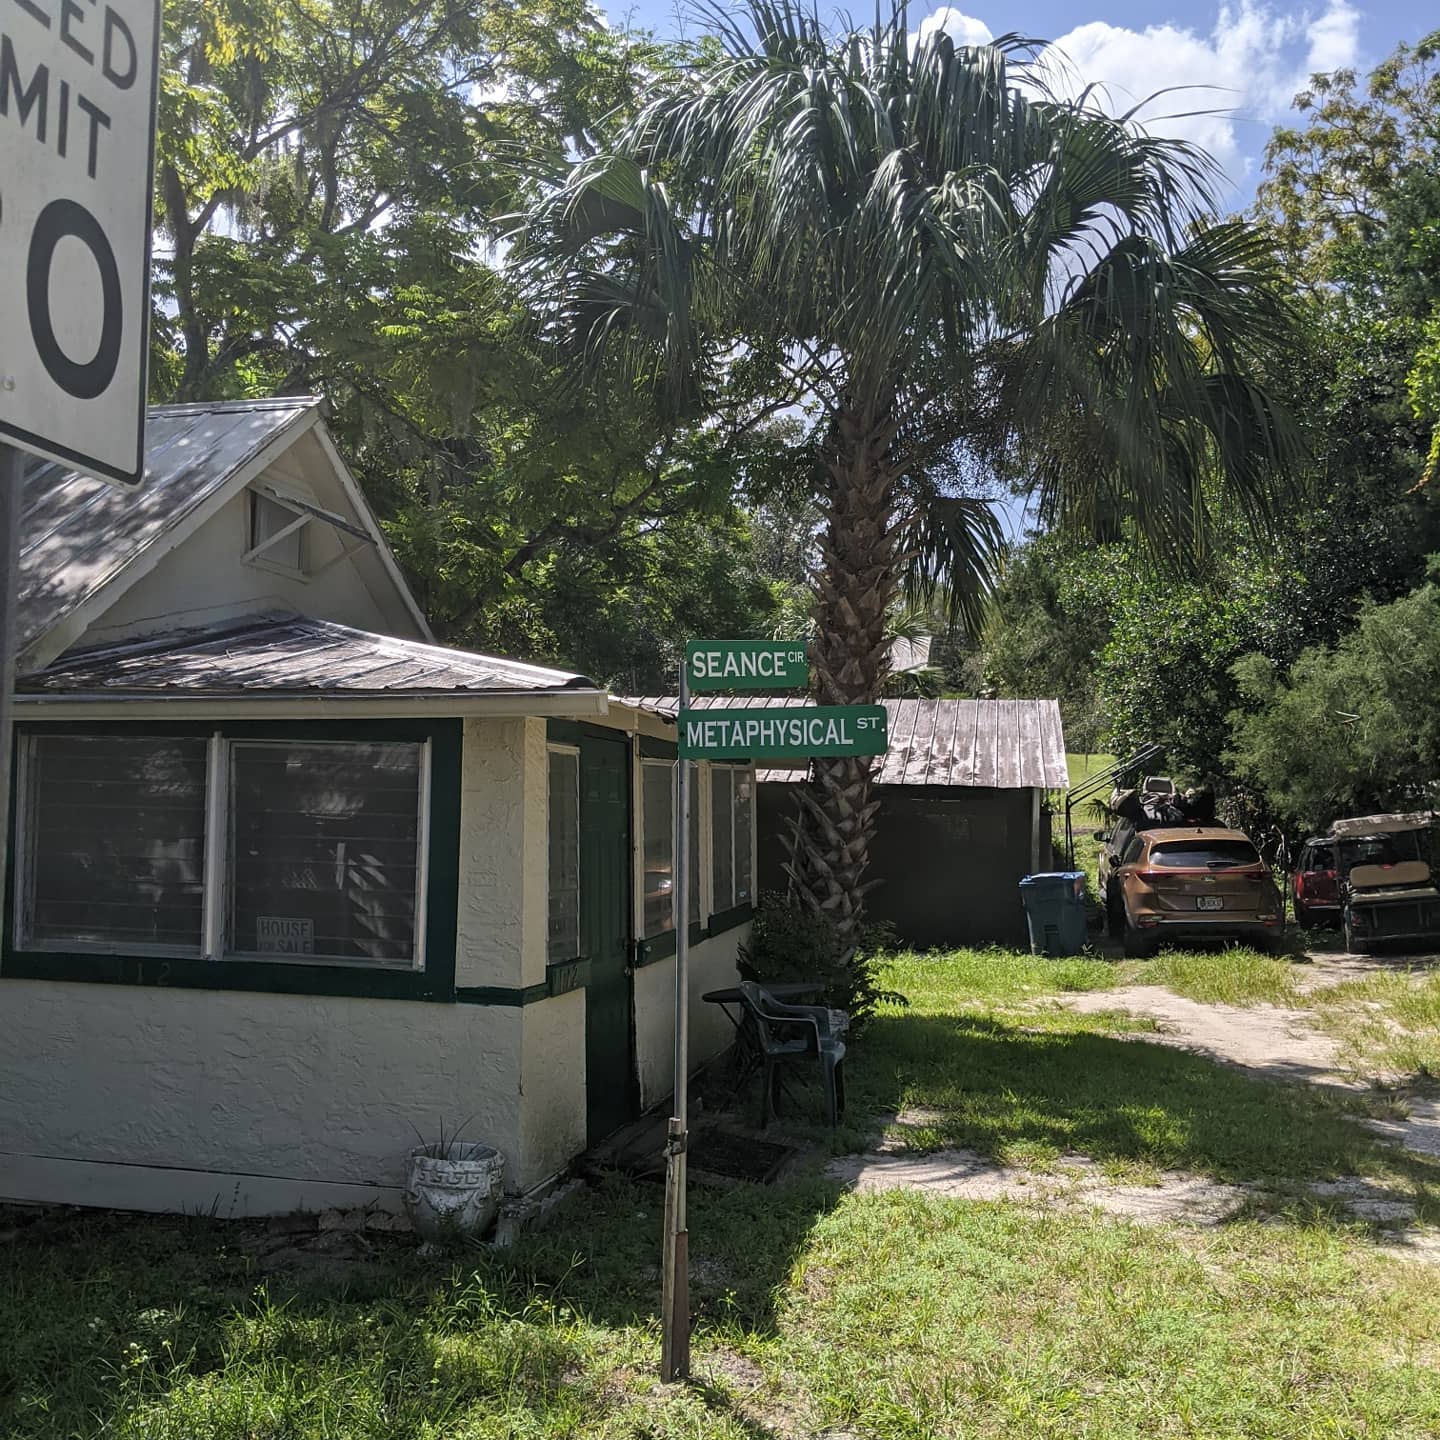 A day in Cassadaga, Florida the "Psychic Capital of the World" (photo